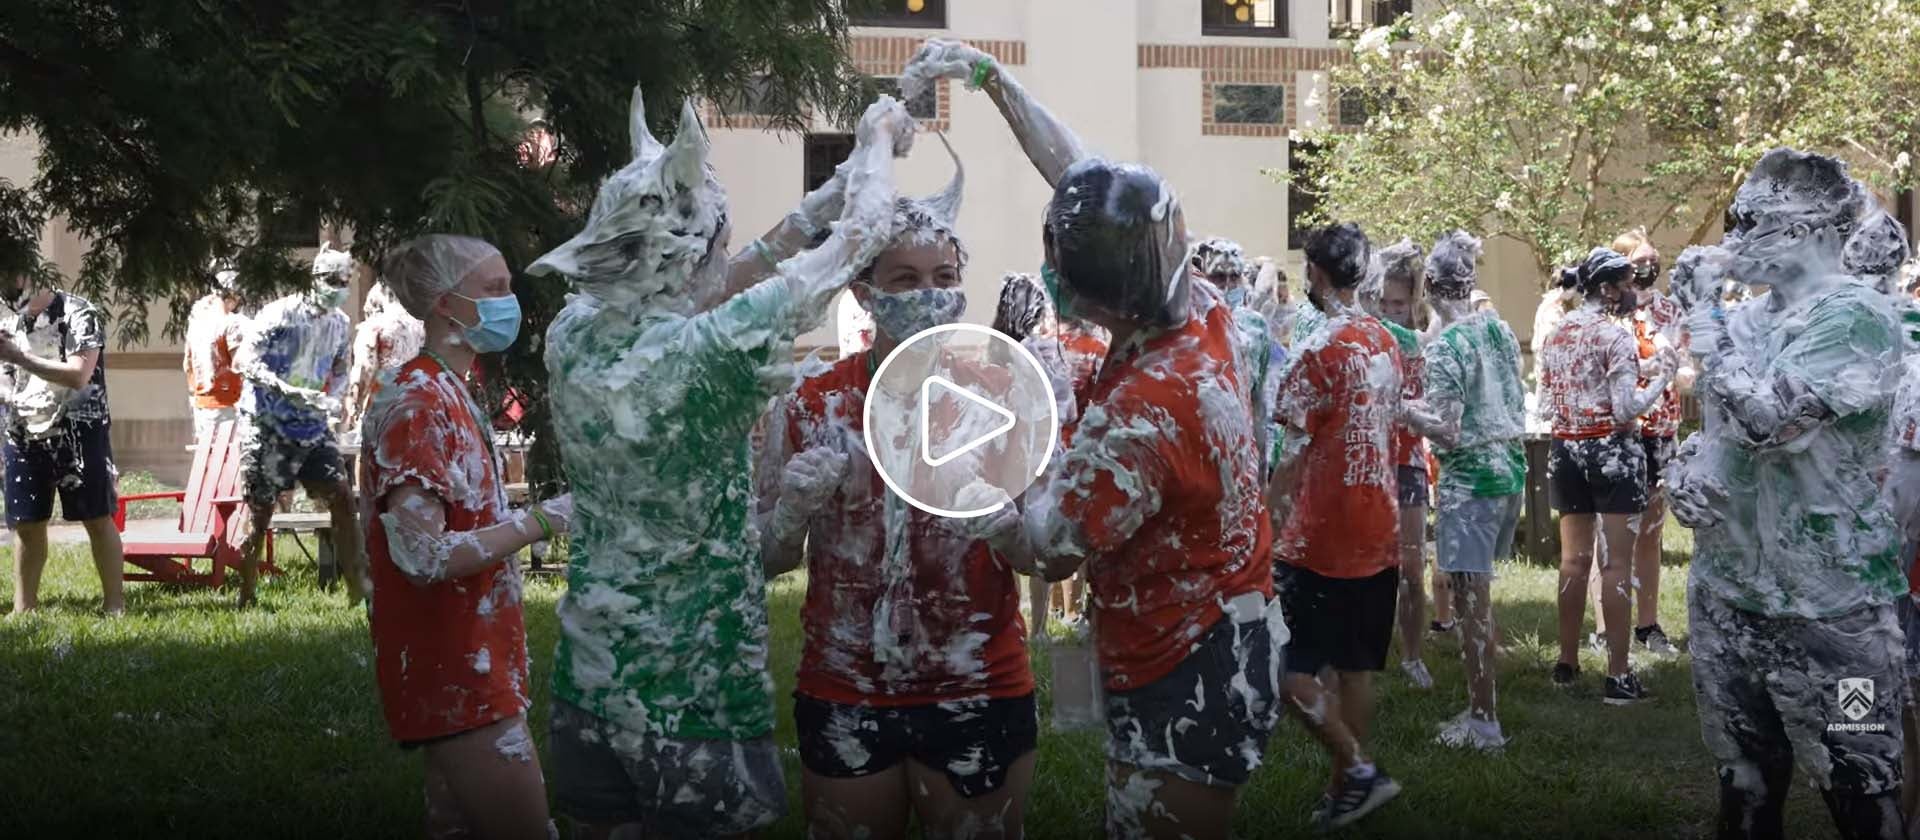 New students are covered in shaving cream outside Baker College for an O-Week event